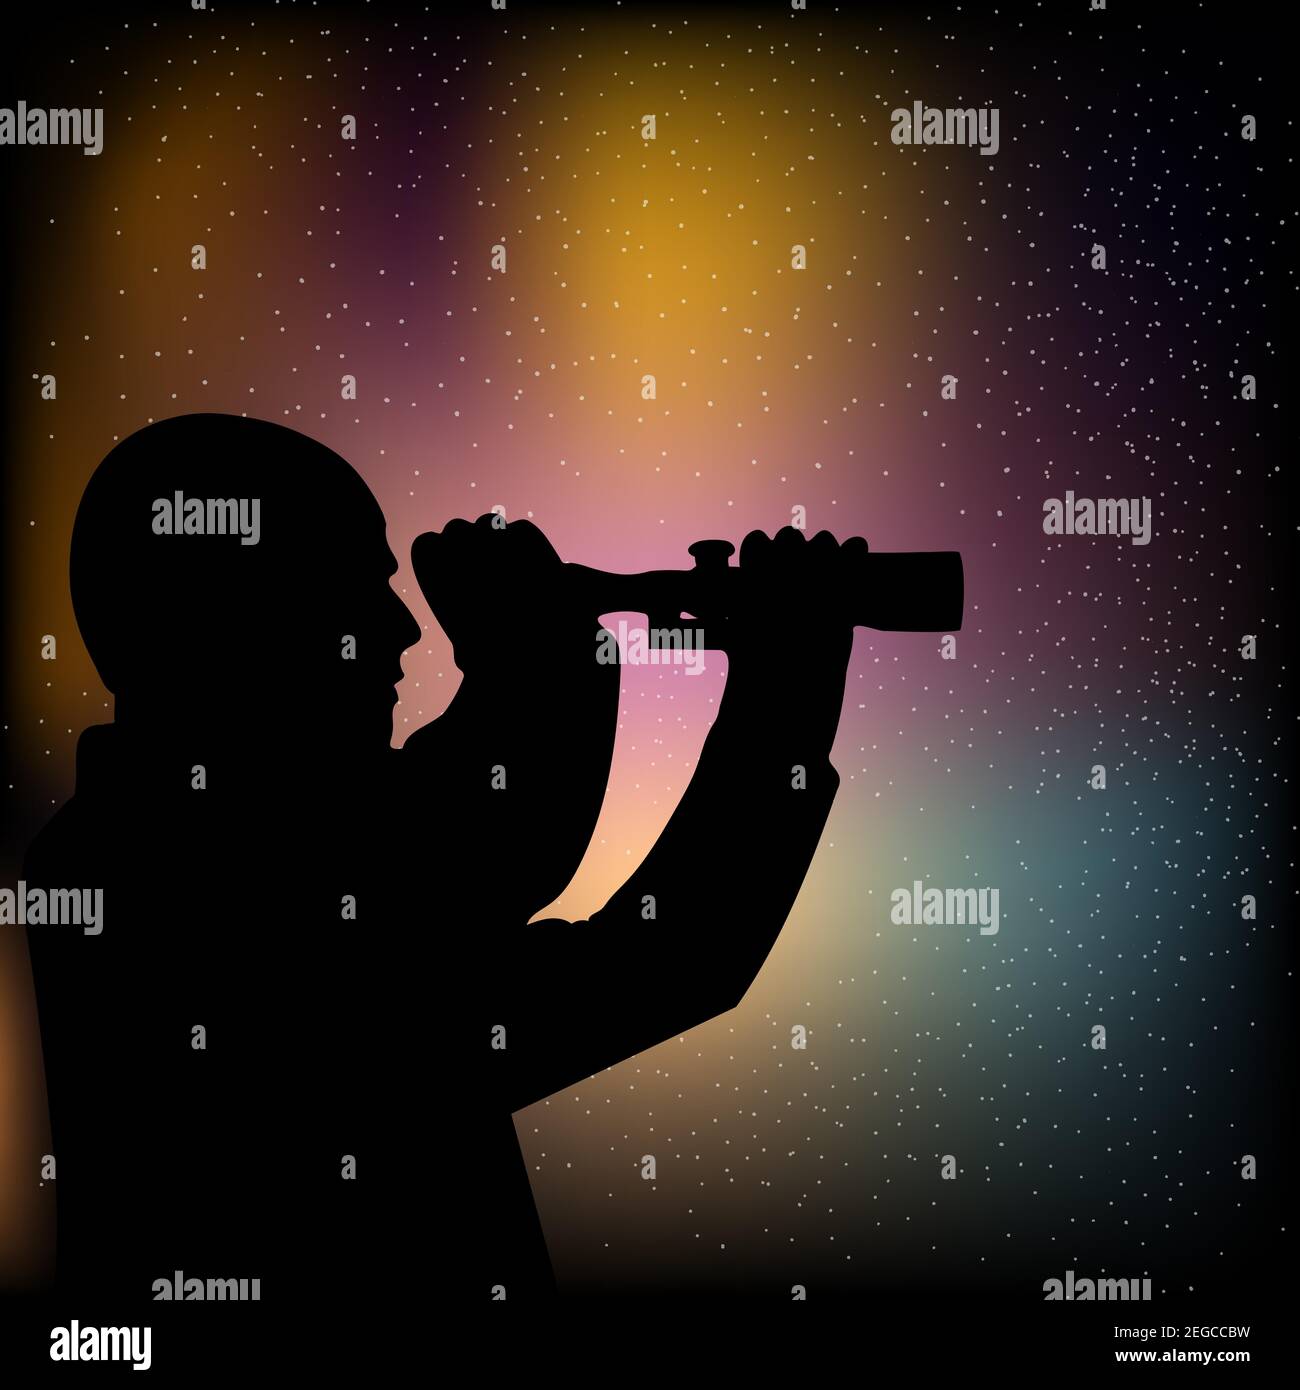 man looking at scope silhouette, stars observers. Stock Vector illustration isolated on white background. Stock Vector